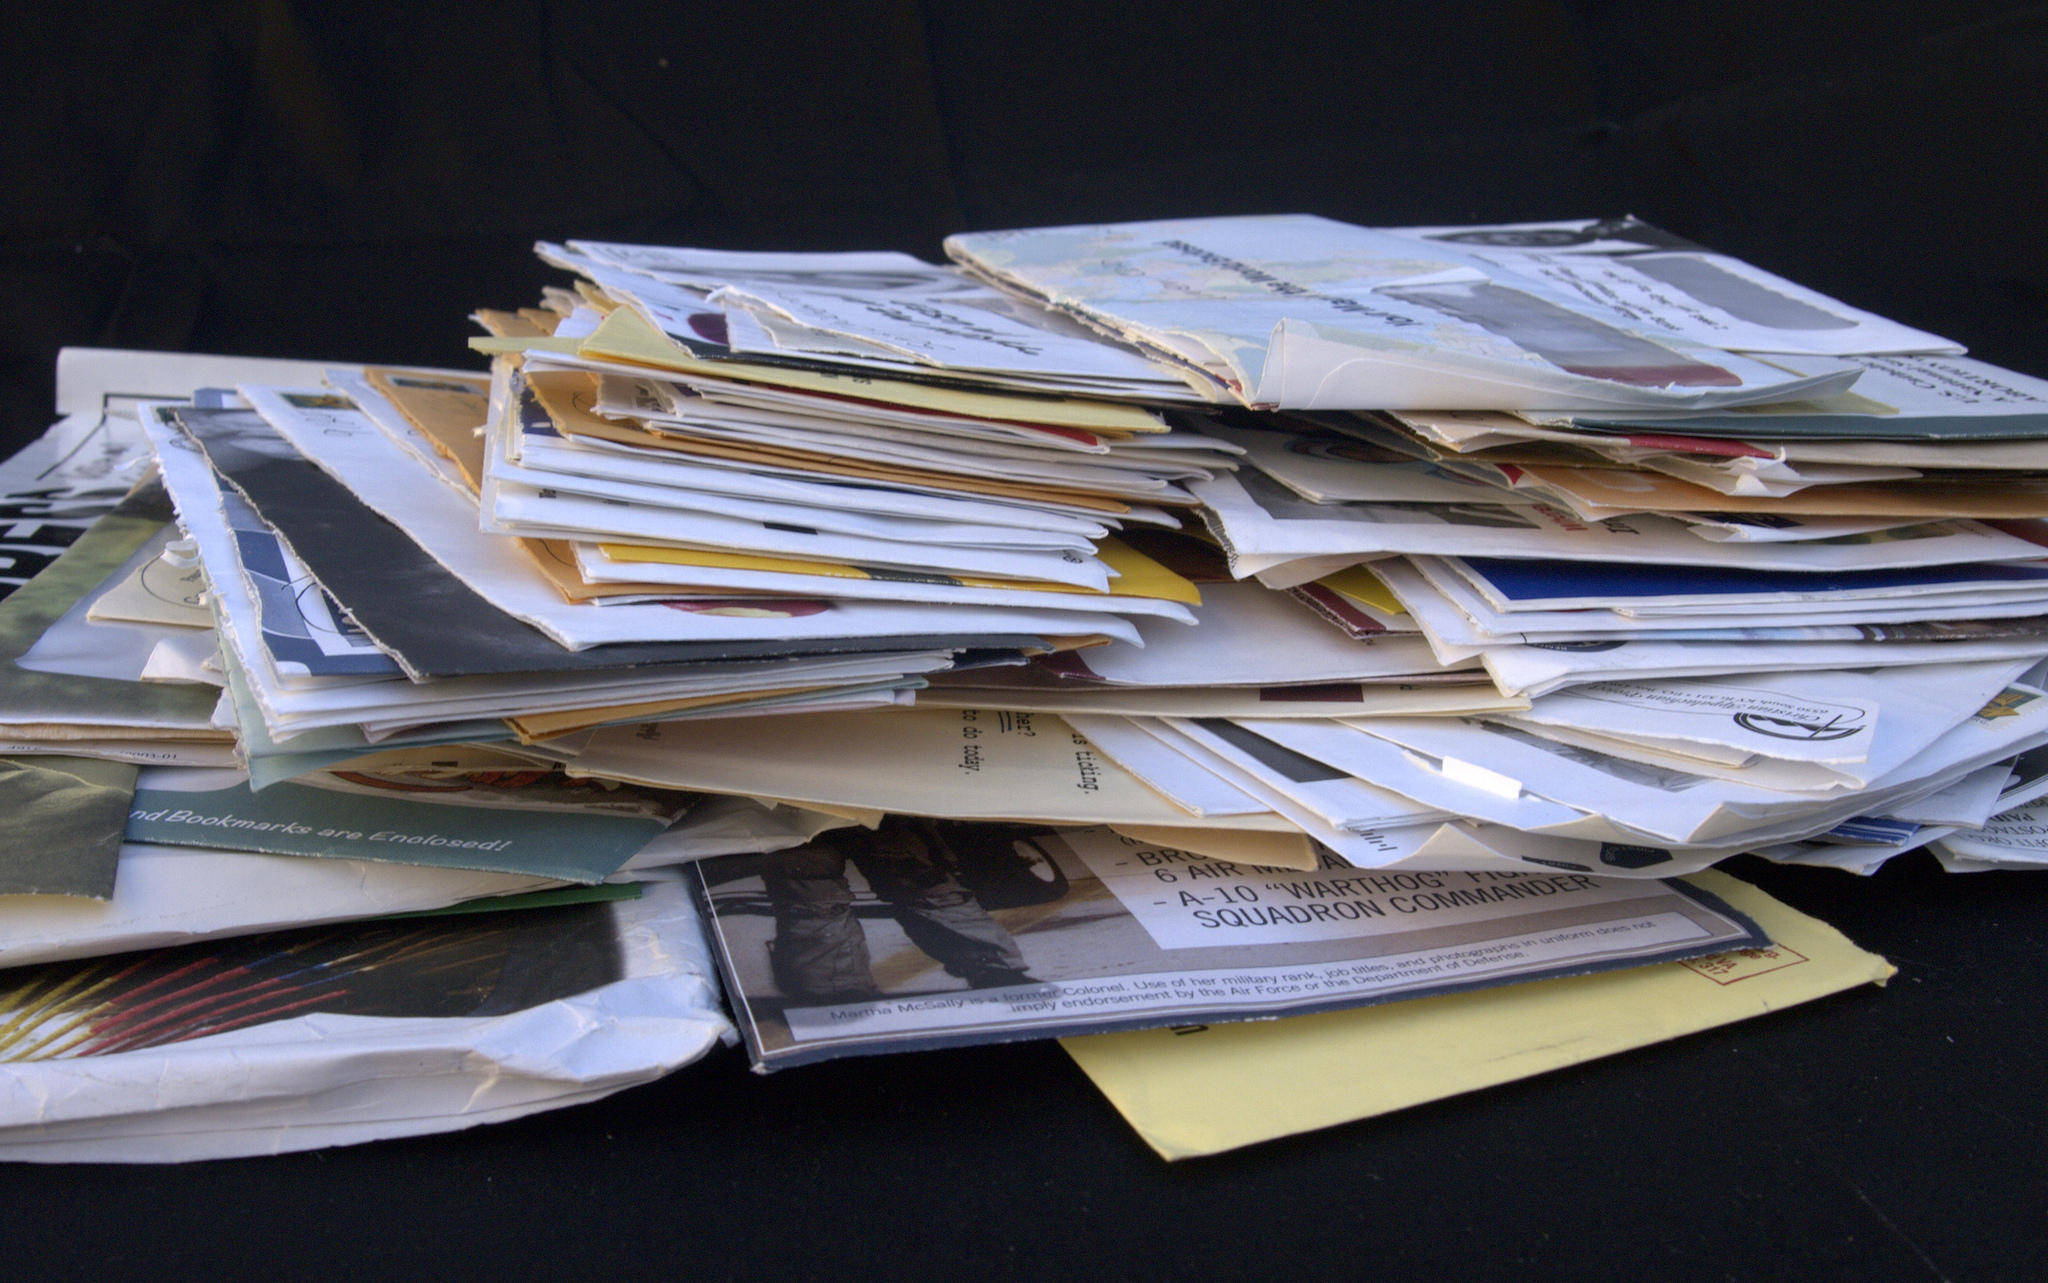 Photograph of a pile of mail